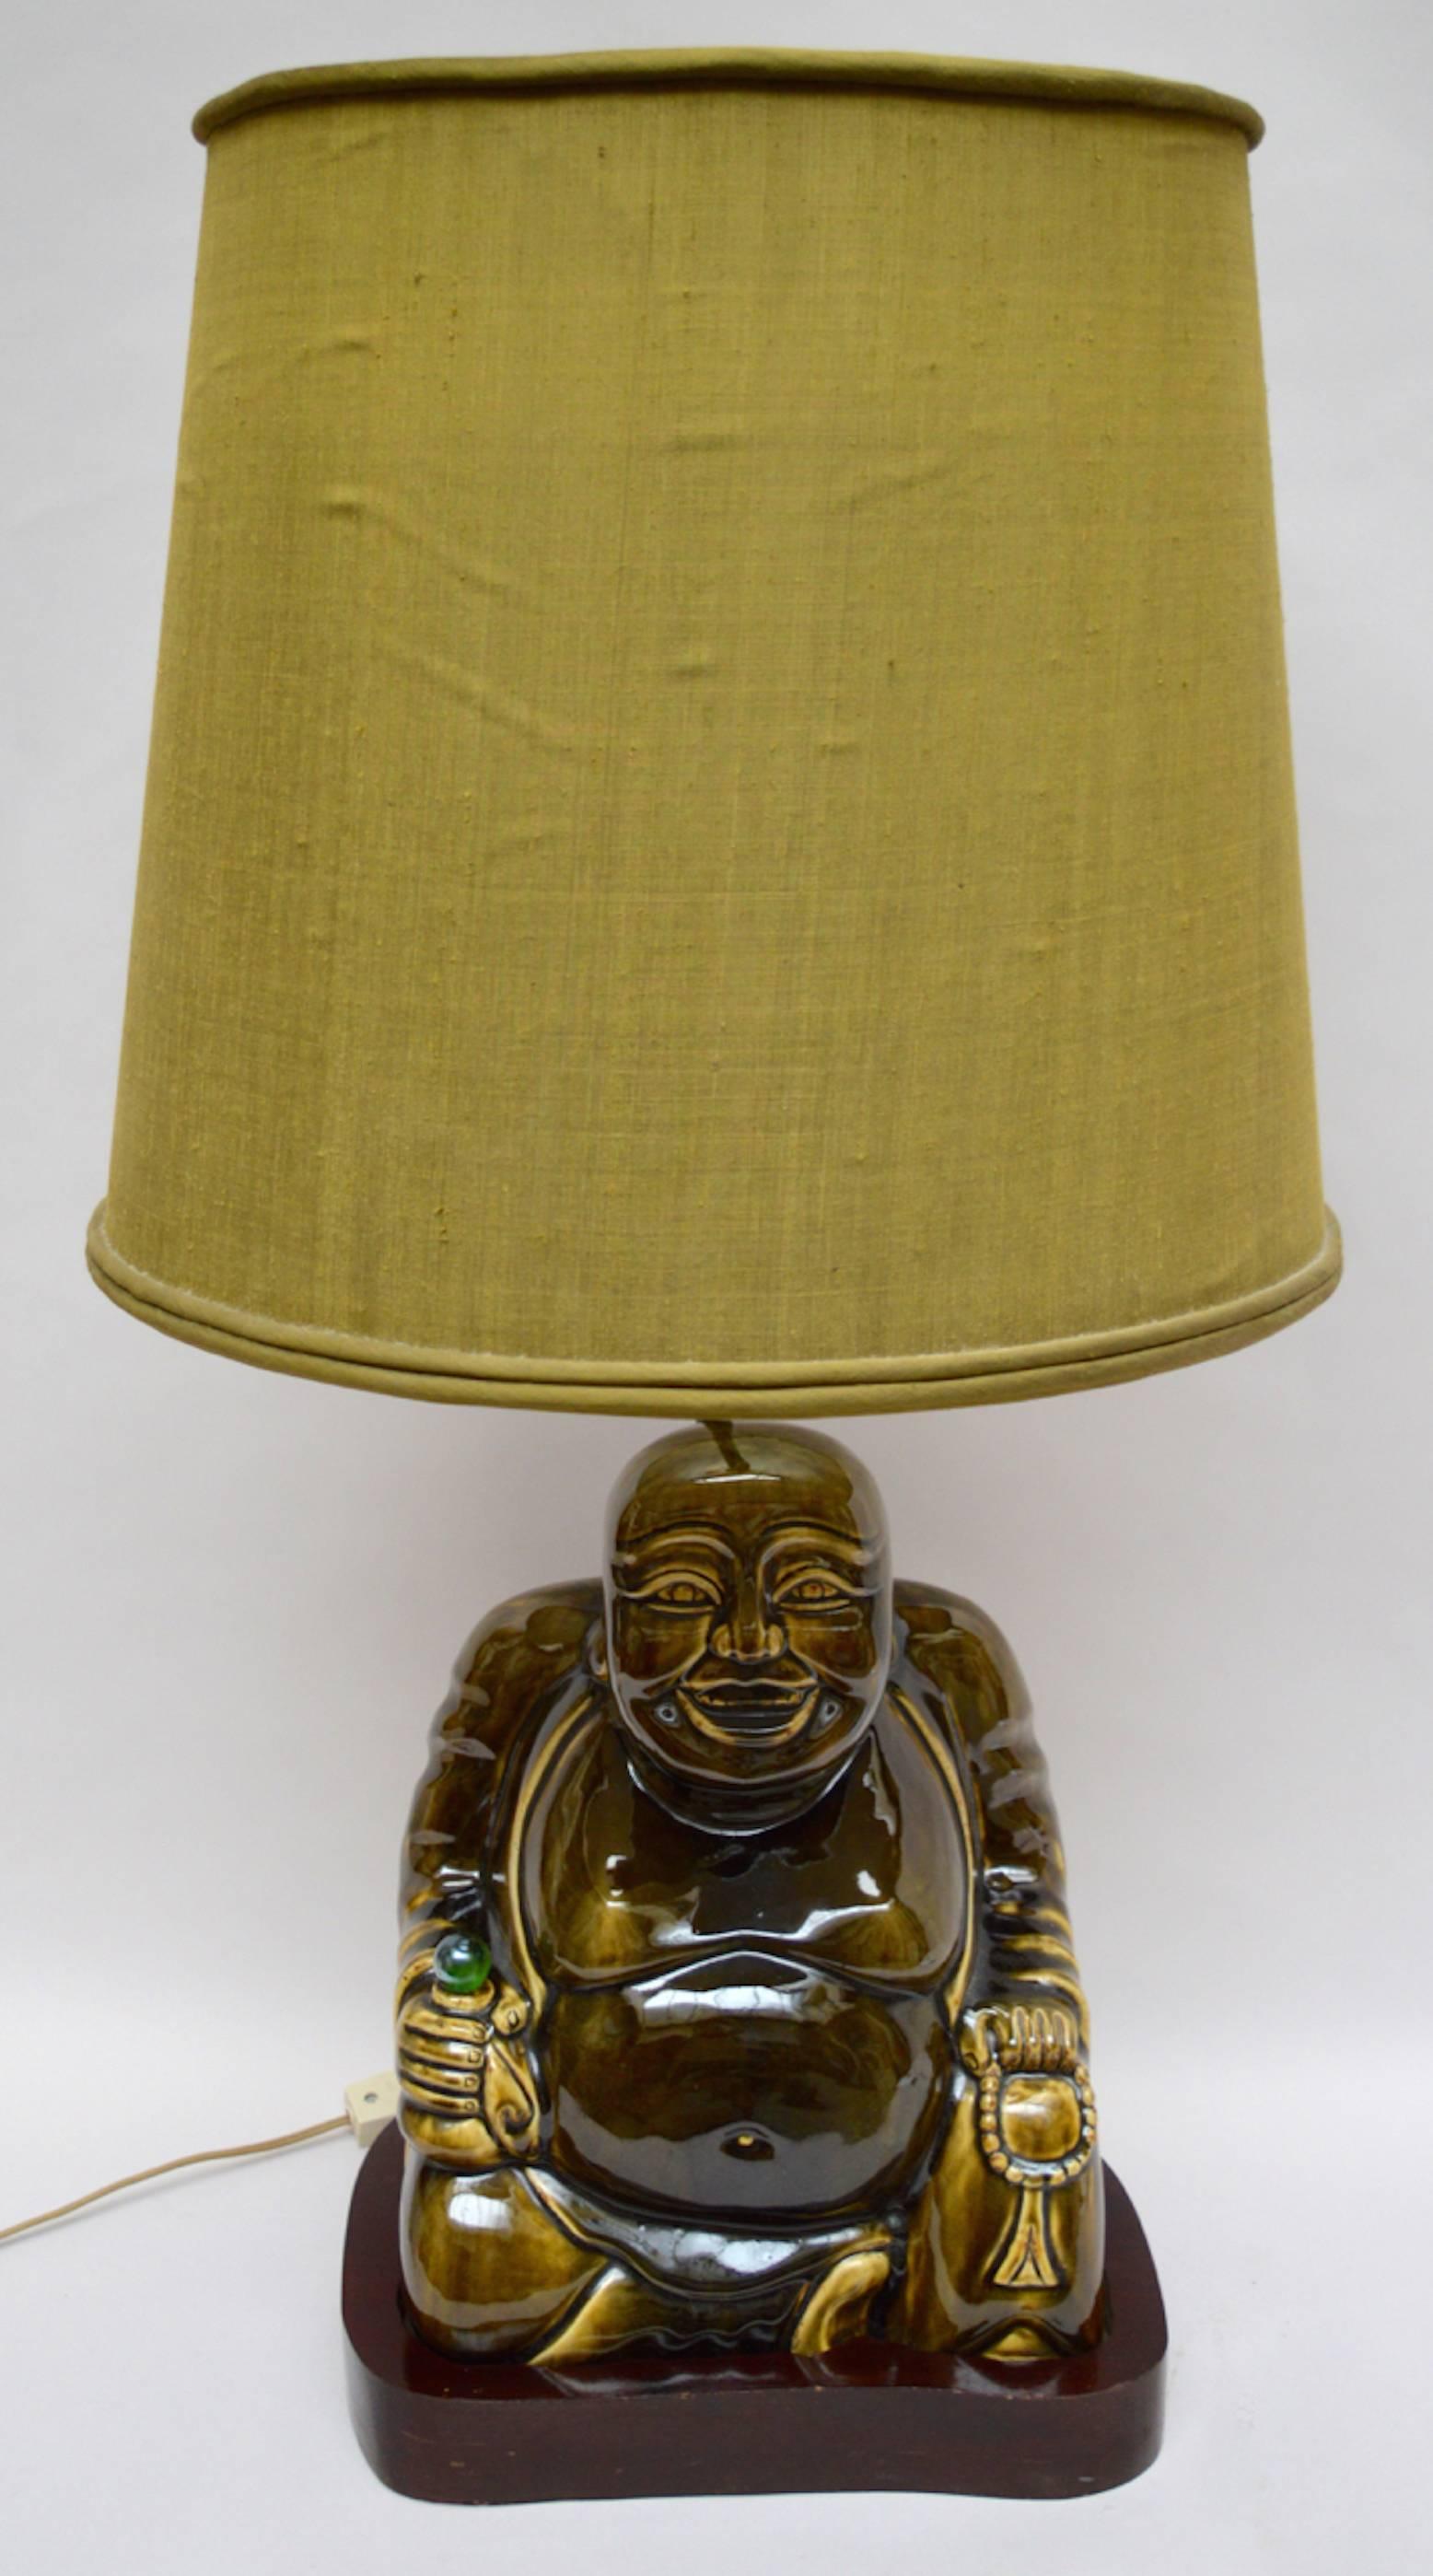 A large glazed porcelain Buddha mounted on a solid wood base retaining the original olive green raw silk lamp shade.
In the style of James Mont who was known as the bad boy of decorating.
Mont, who was born in Constantinople, claimed; I am an